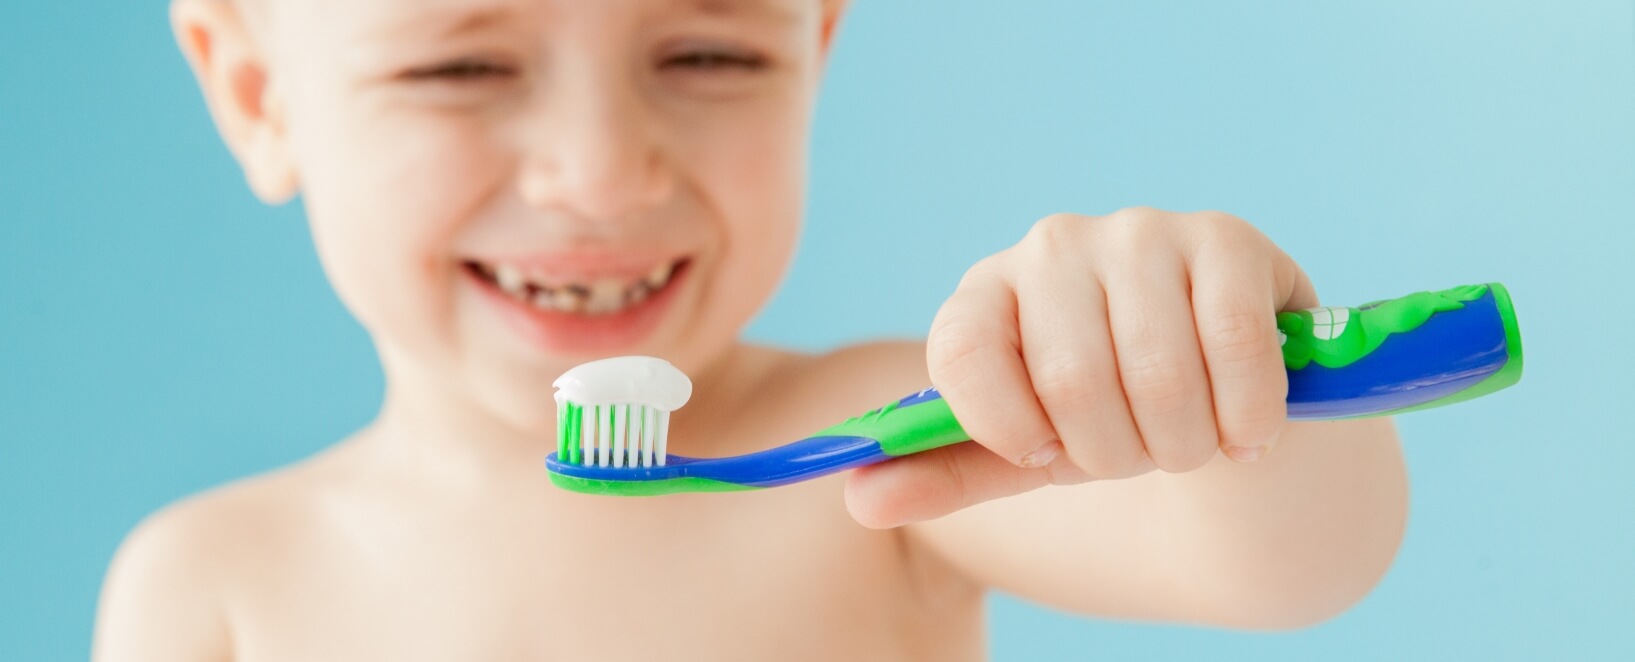 boy holding out toothbrush with toothpaste on it